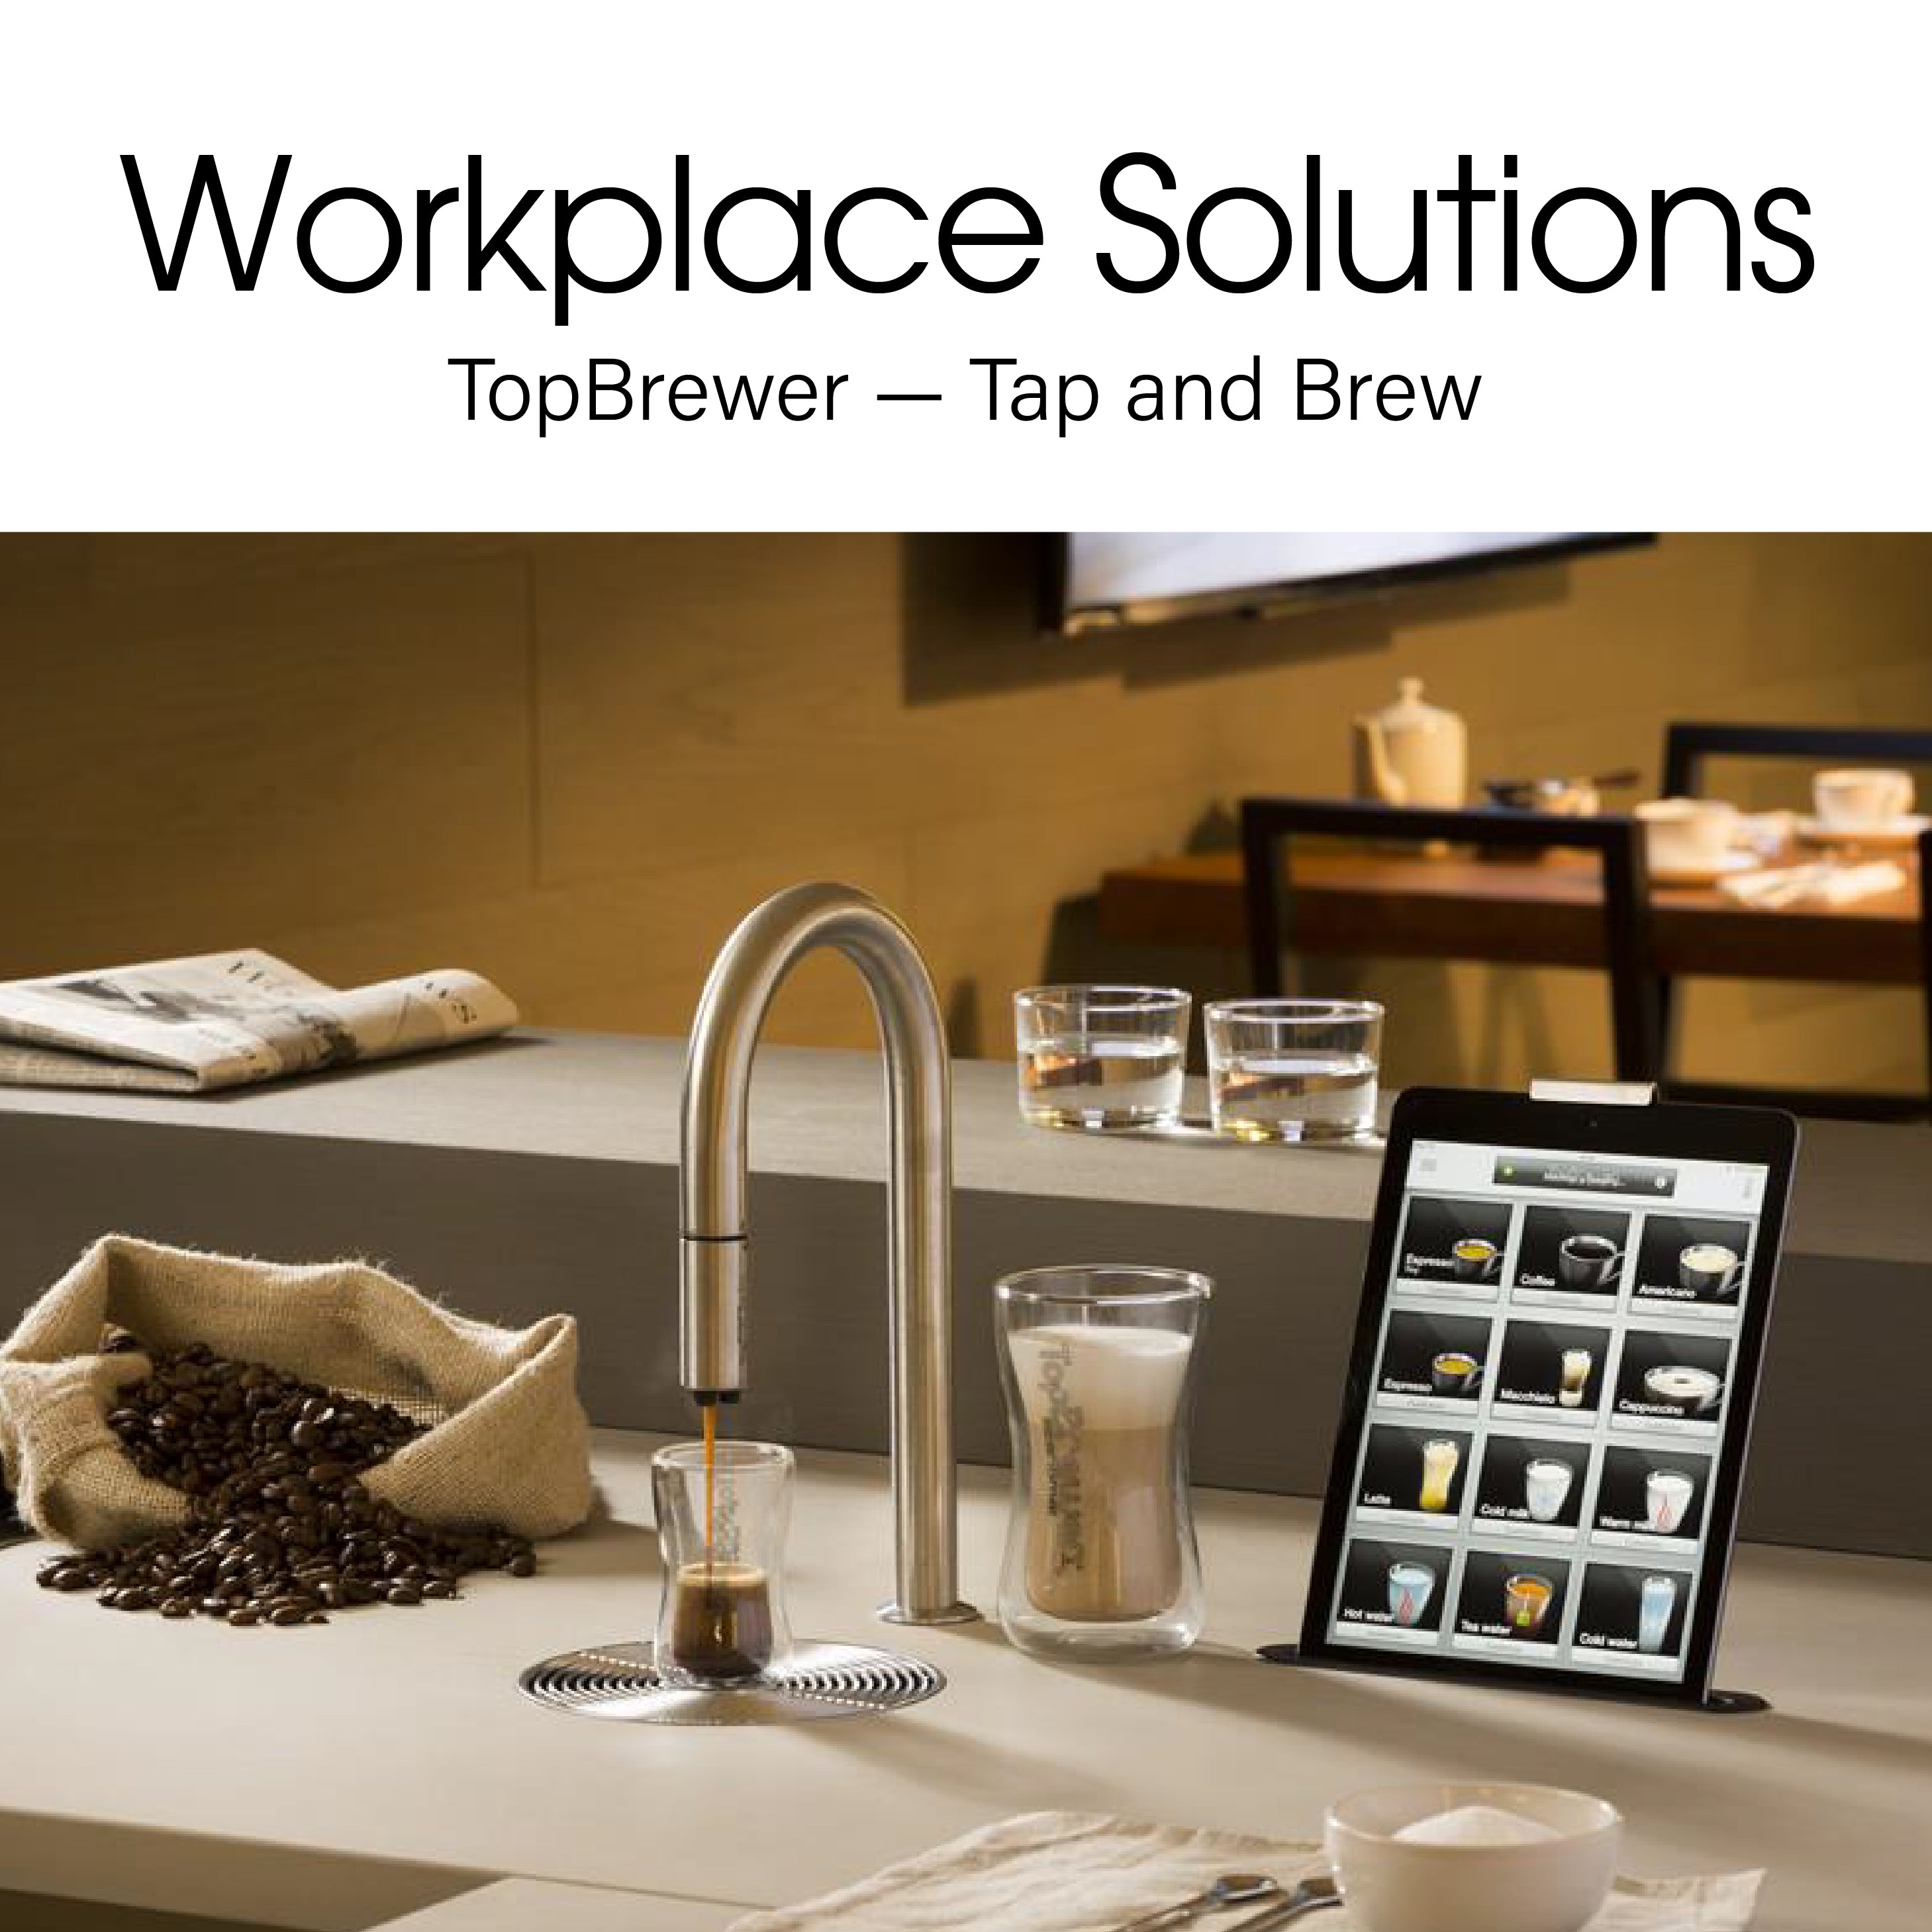 COLOURLIVING | WORKPLACE SOLUTIONS | TopBrewer - Tap and Brew